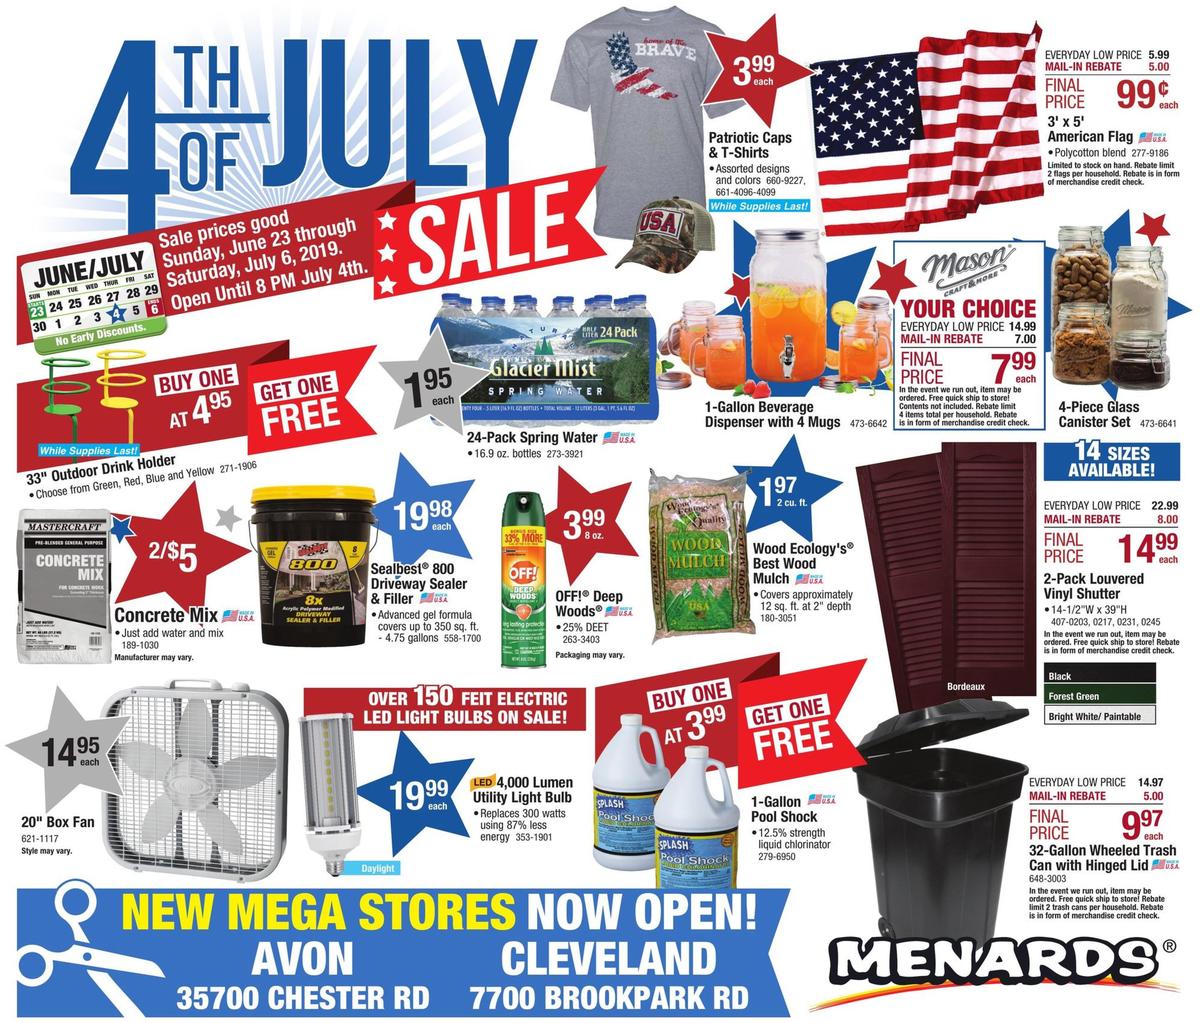 Menards Weekly Ads & Special Buys from June 23